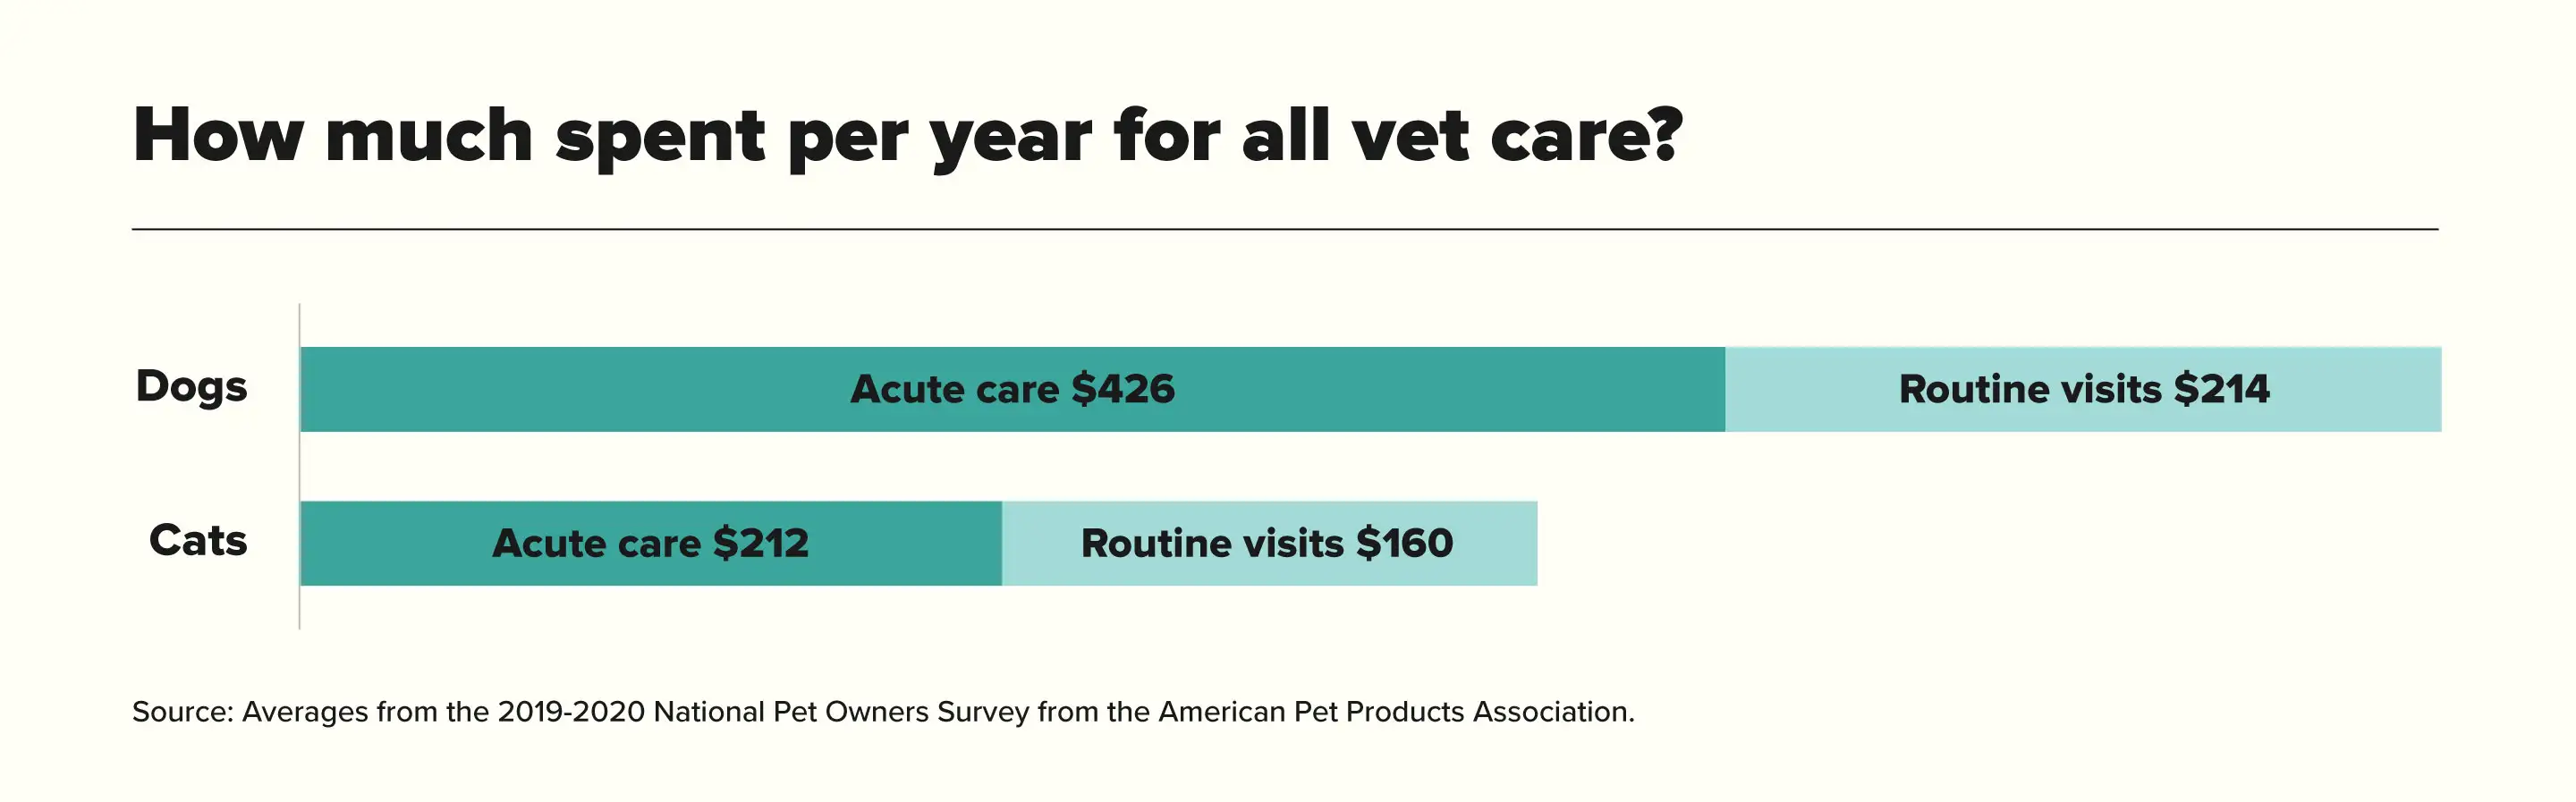 How much spent per year for all vet care